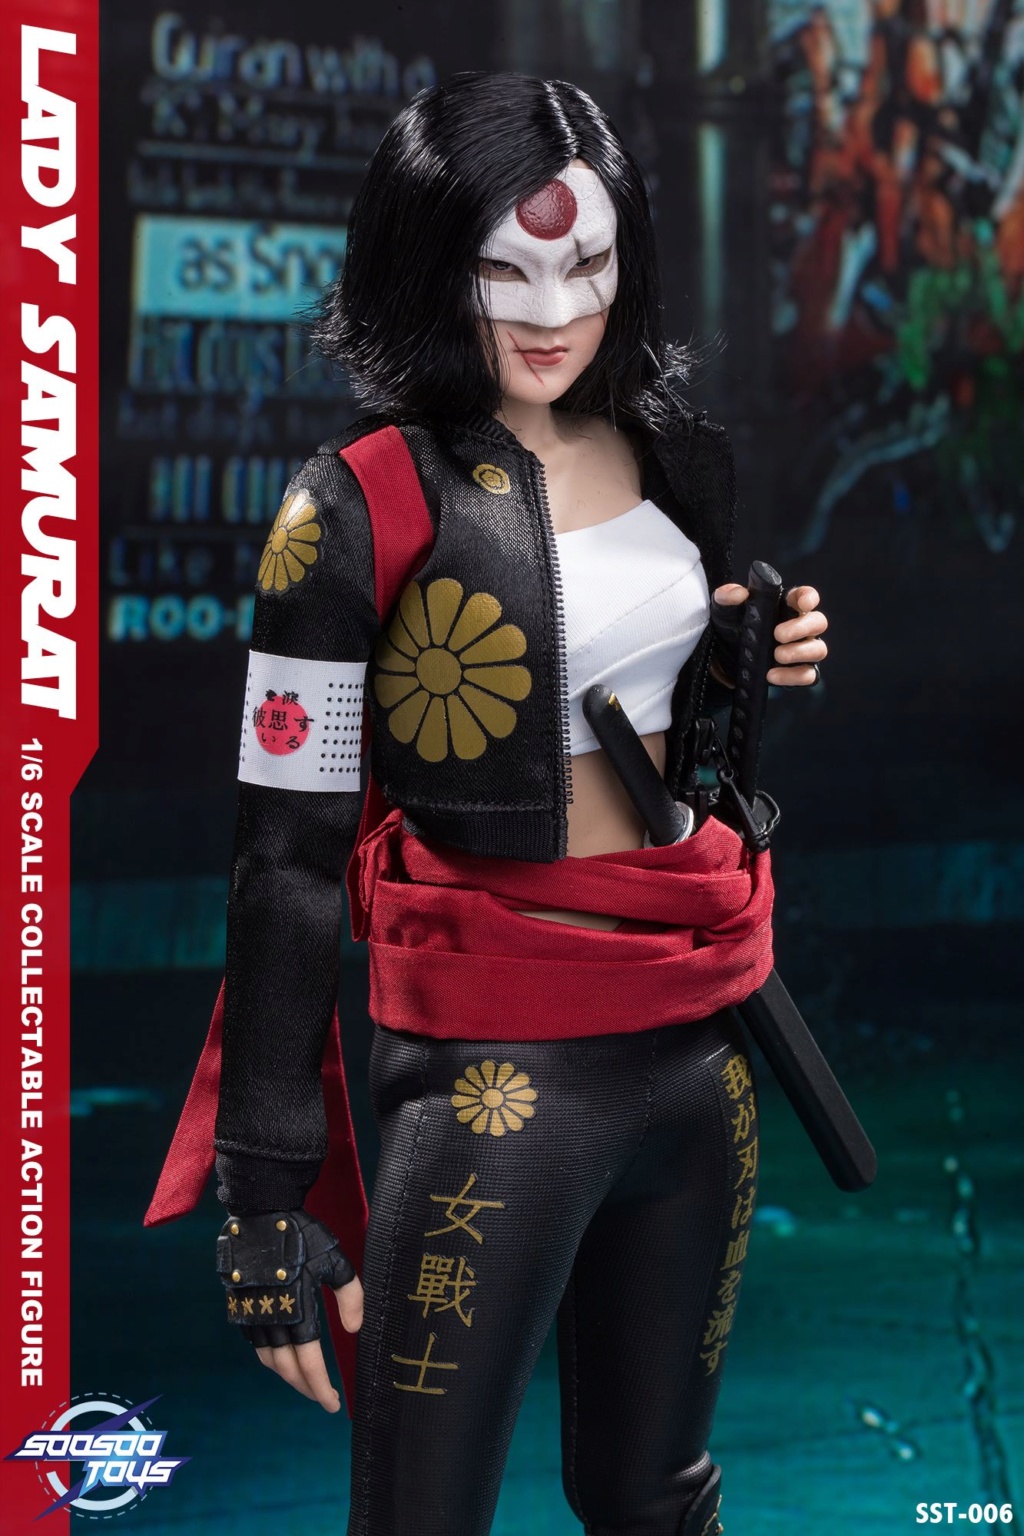 LadySamurai - NEW PRODUCT: Soosootoys 1/6 scale collectible SST-006 Lady Samurai 2198